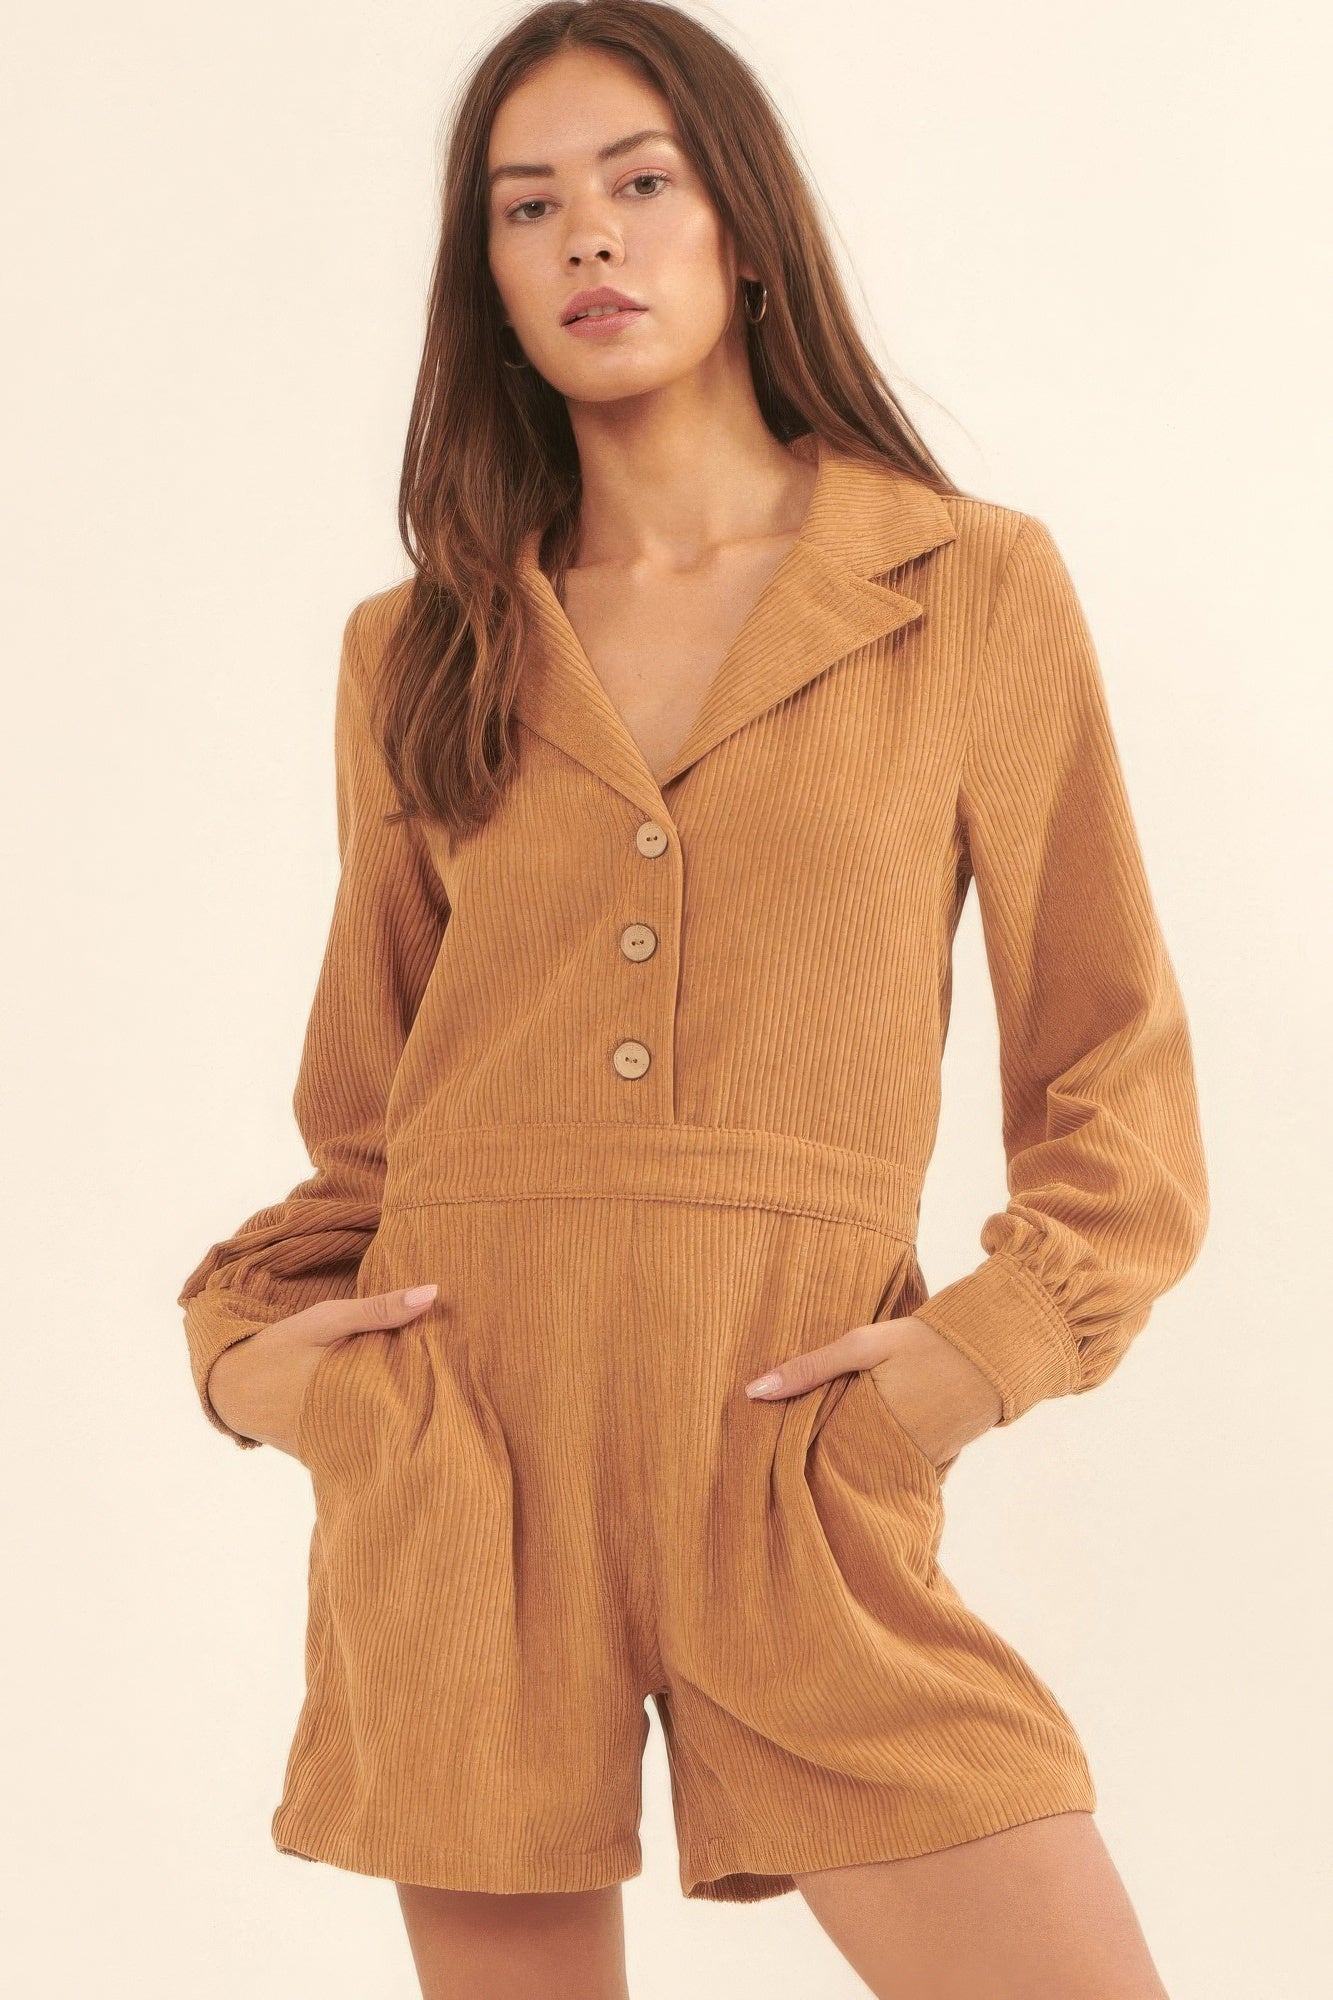 A Woven Corduroy Romper - Taupe